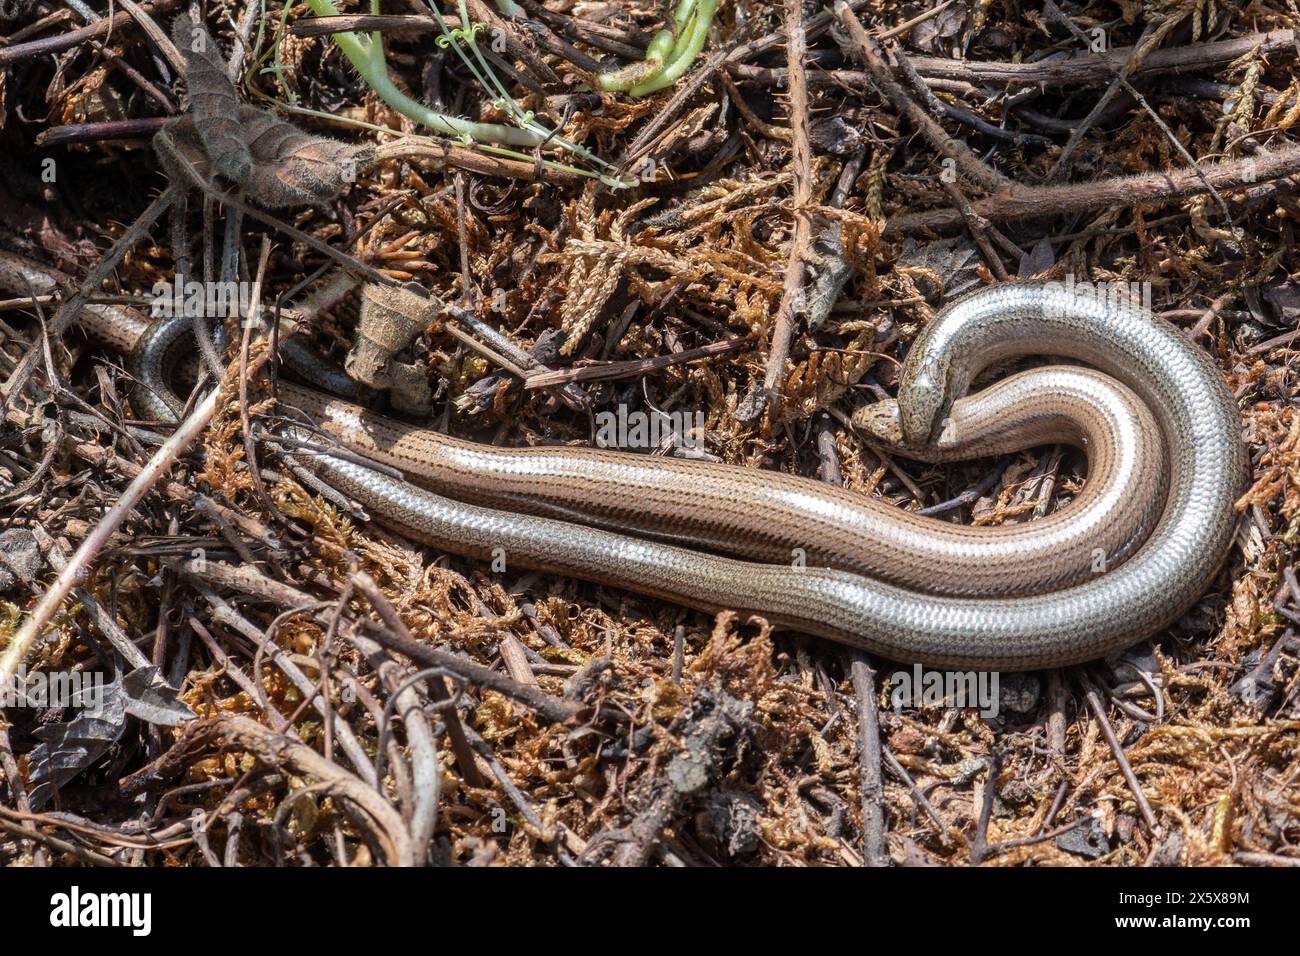 Pair of slow worms (Anguis fragilis), mating behaviour with the male animal biting the neck of the female Stock Photo